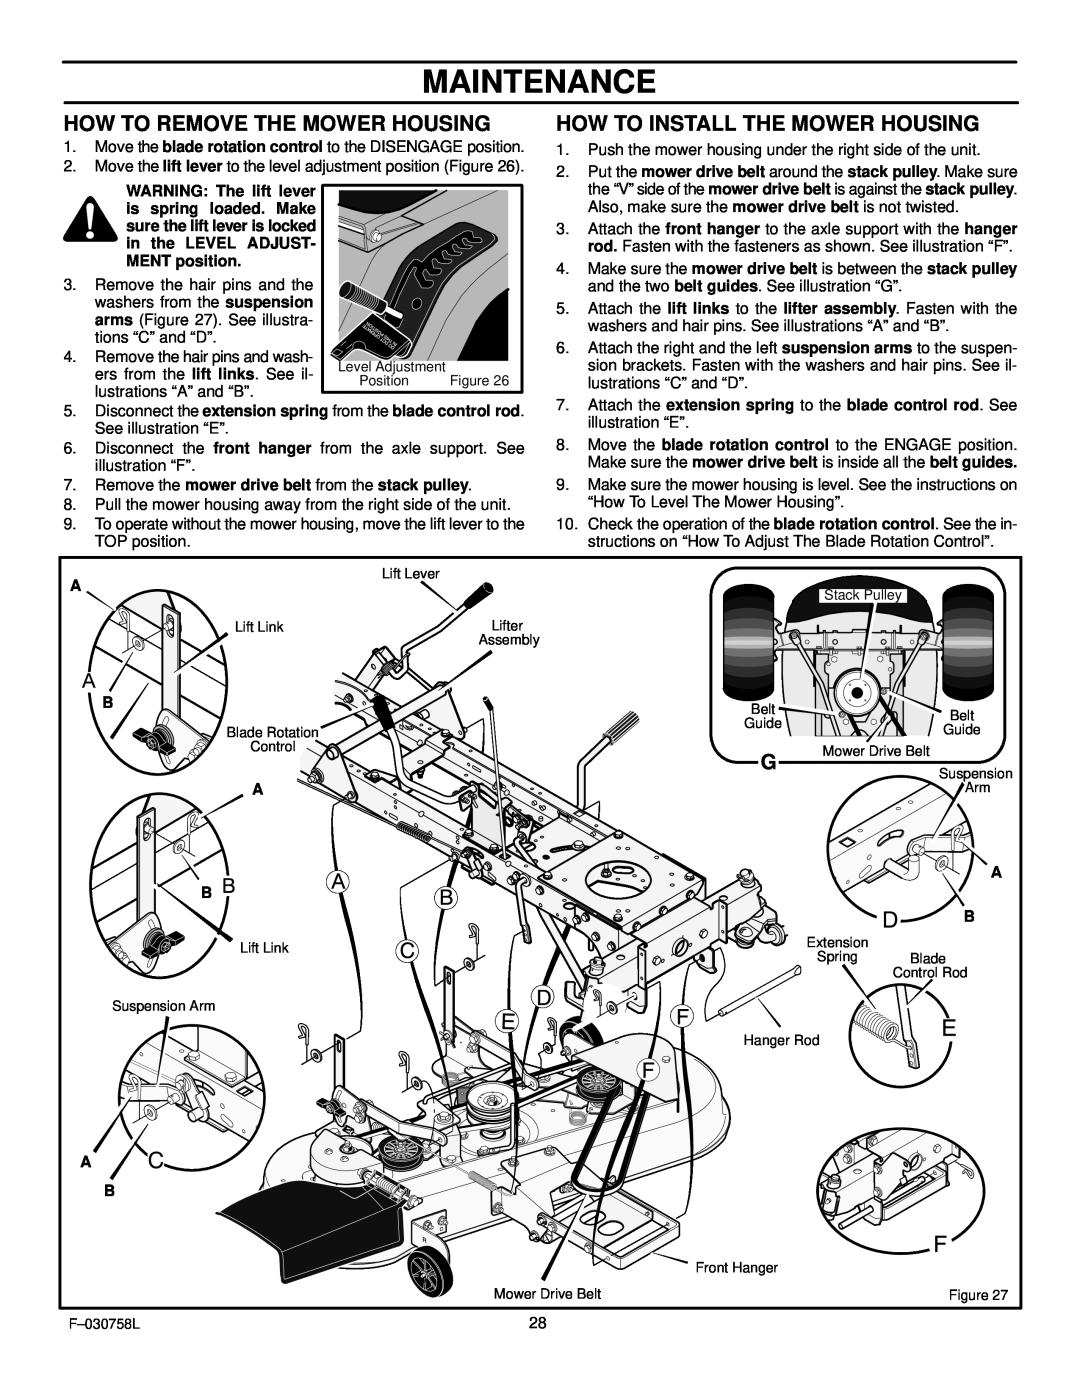 Murray 465609x24A manual Maintenance, How To Remove The Mower Housing, How To Install The Mower Housing 